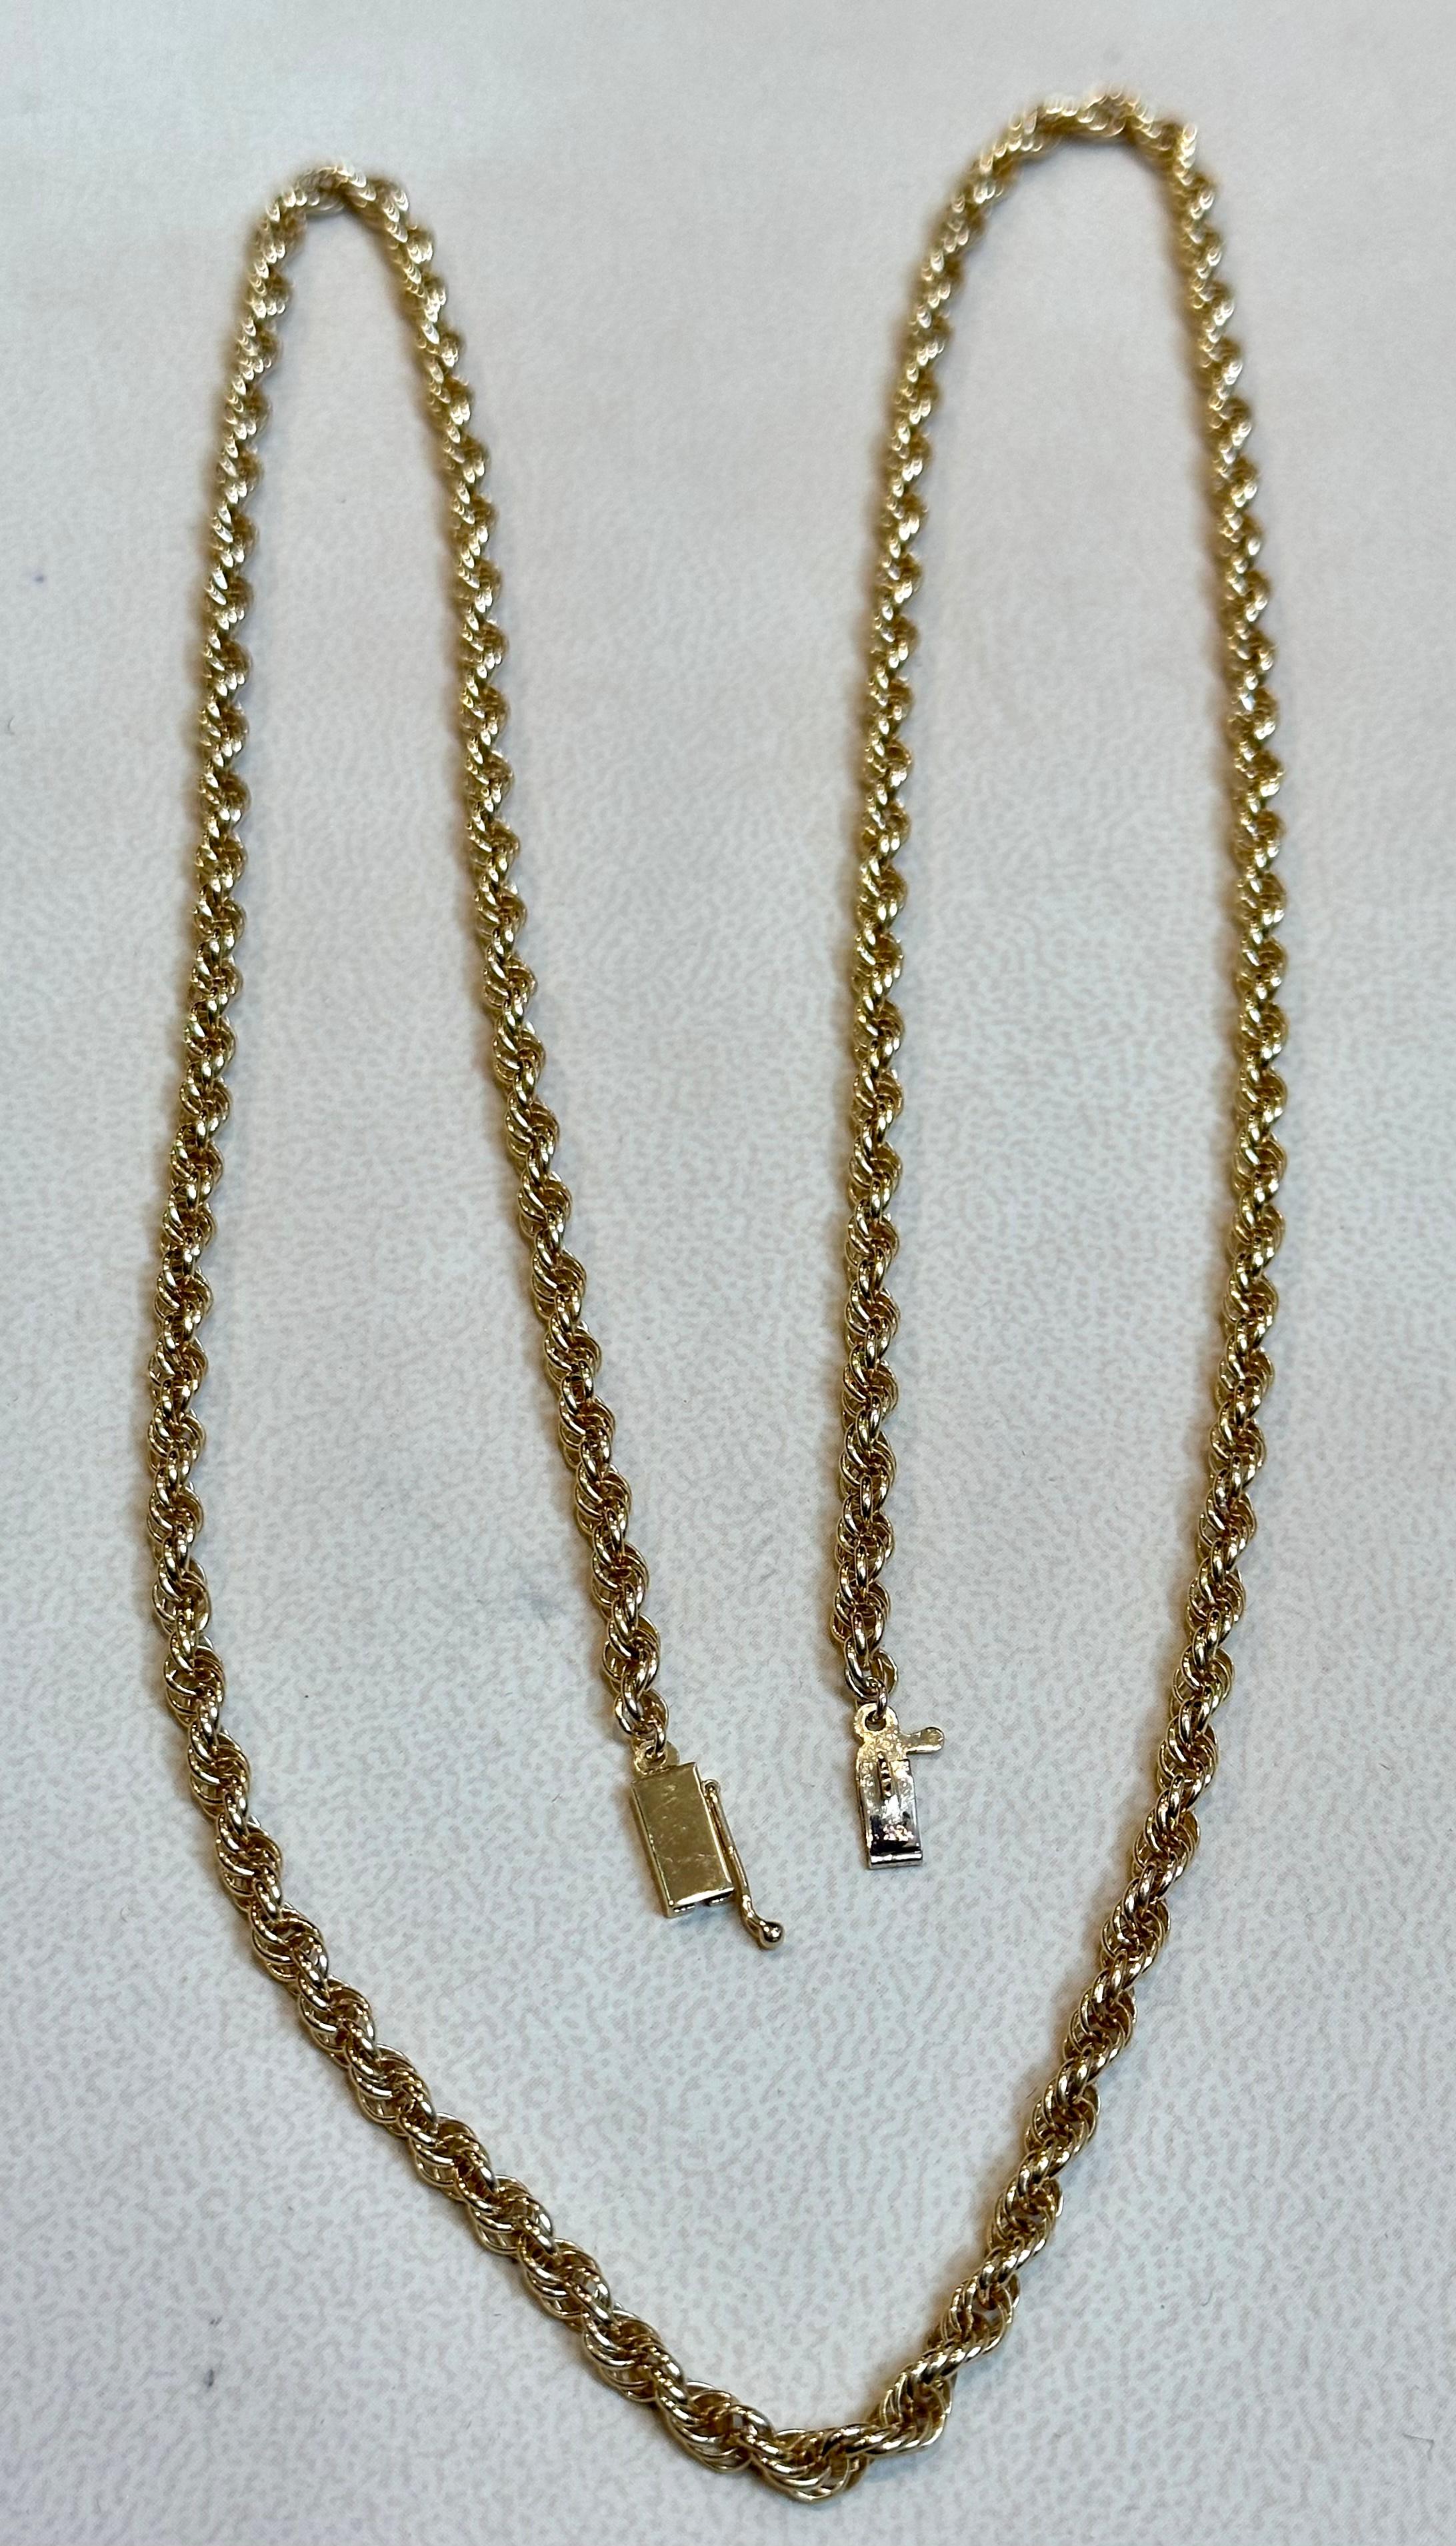 Women's or Men's Vintage 14 Karat Yellow Gold 20.5 Gm, Rope Chain Necklace For Sale